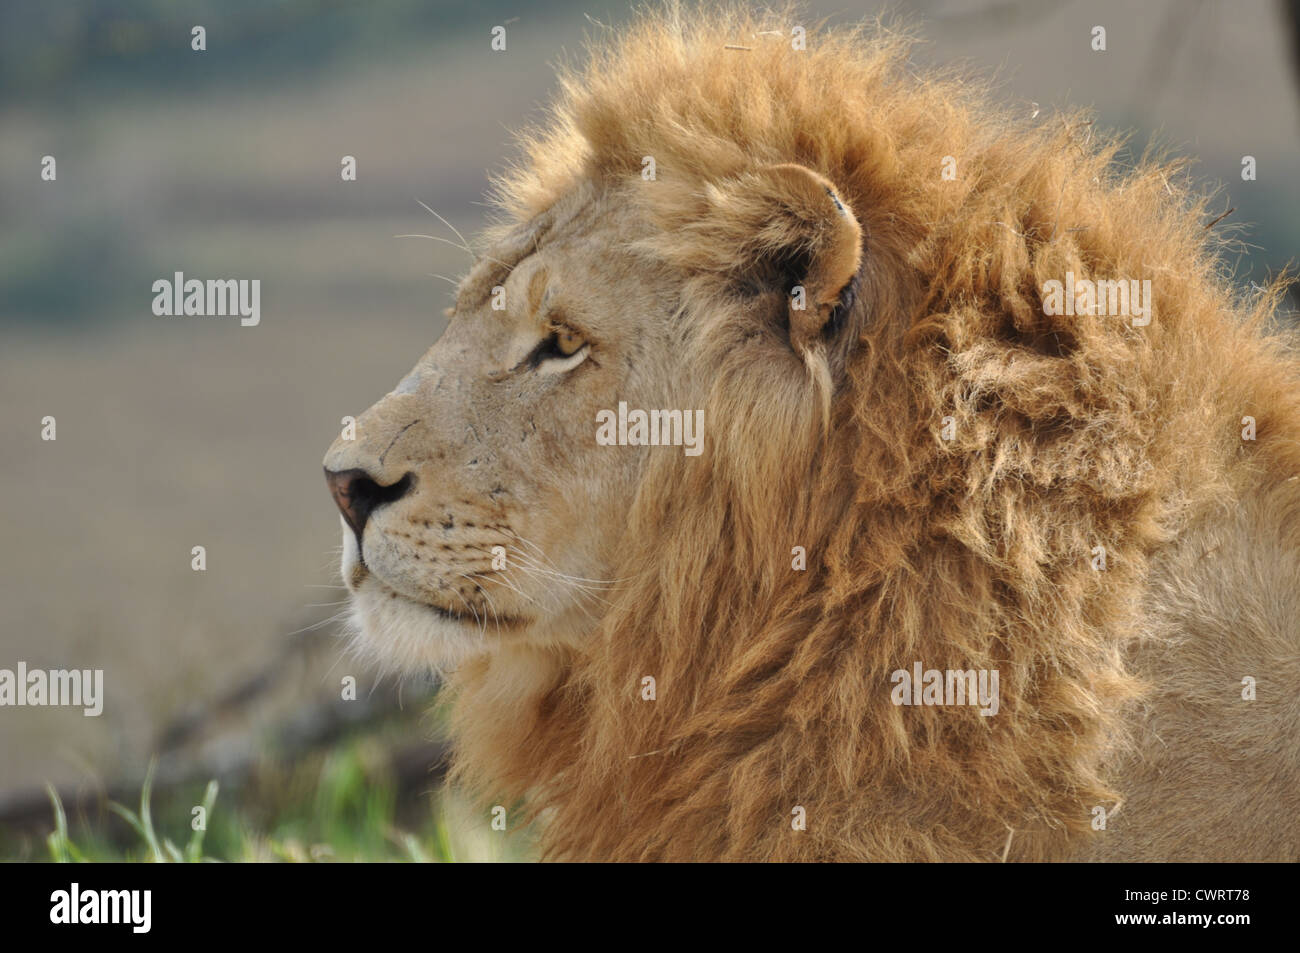 Male lion head from its profile Stock Photo